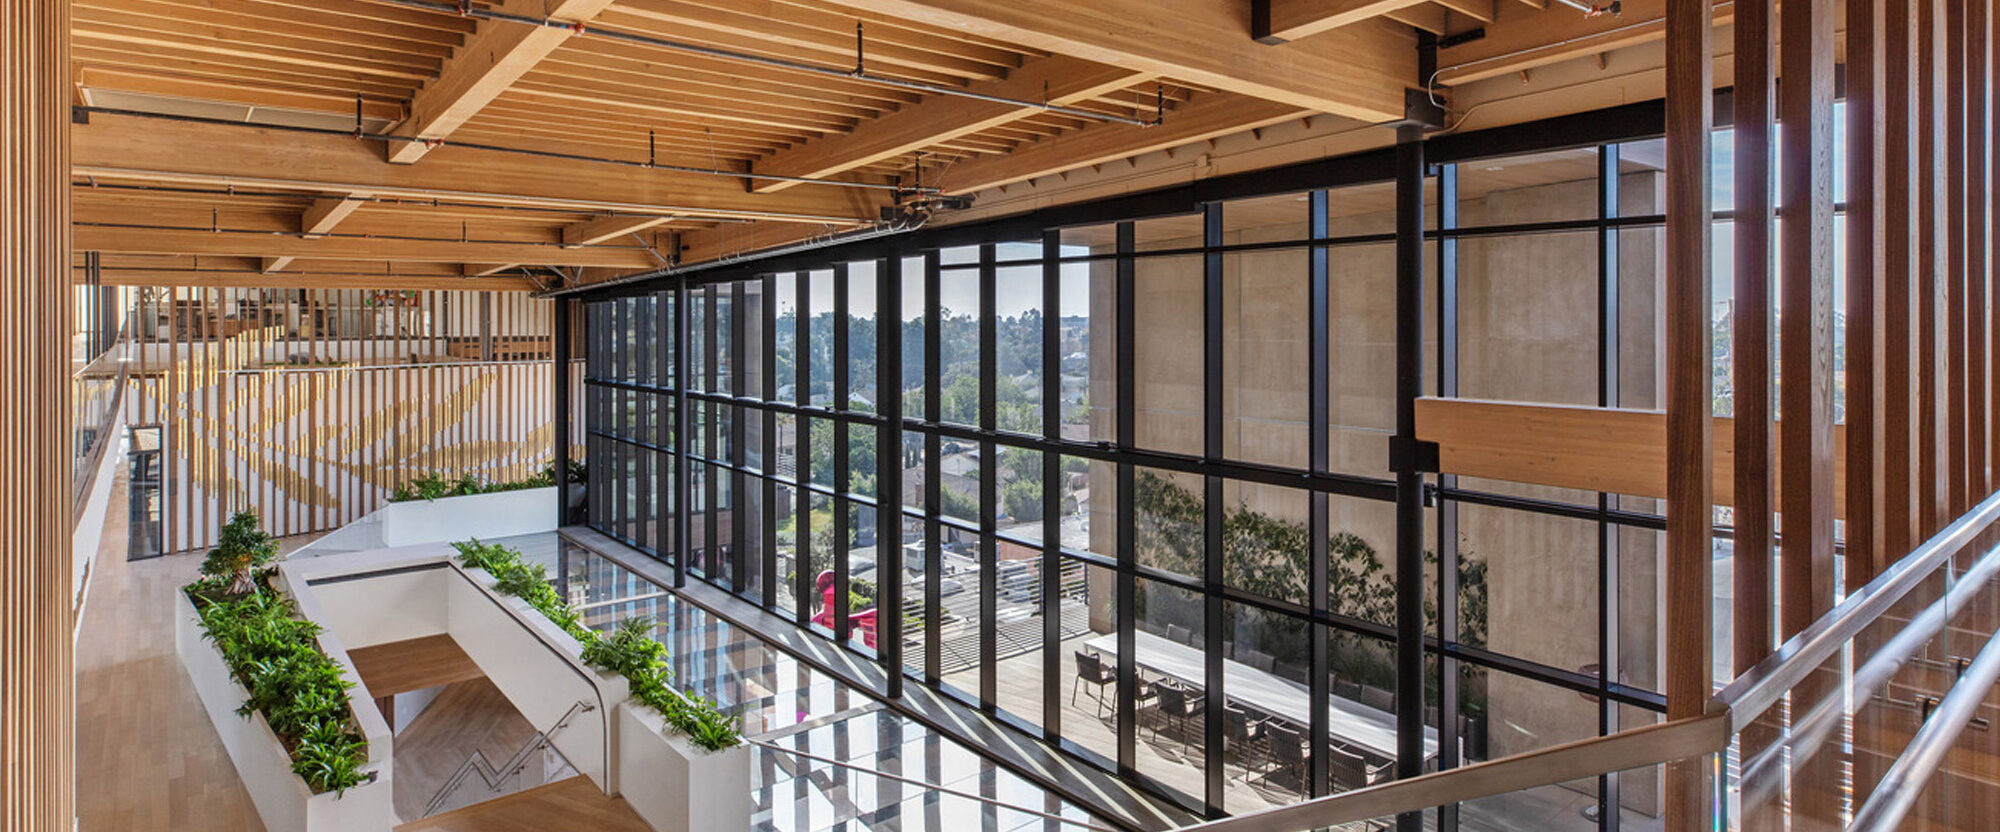 Modern office interior highlighting exposed wooden beams and slatted ceiling design, complemented by glass railing, open-plan staircases, and indoor greenery, creating a biophilic, industrial aesthetic with natural light.